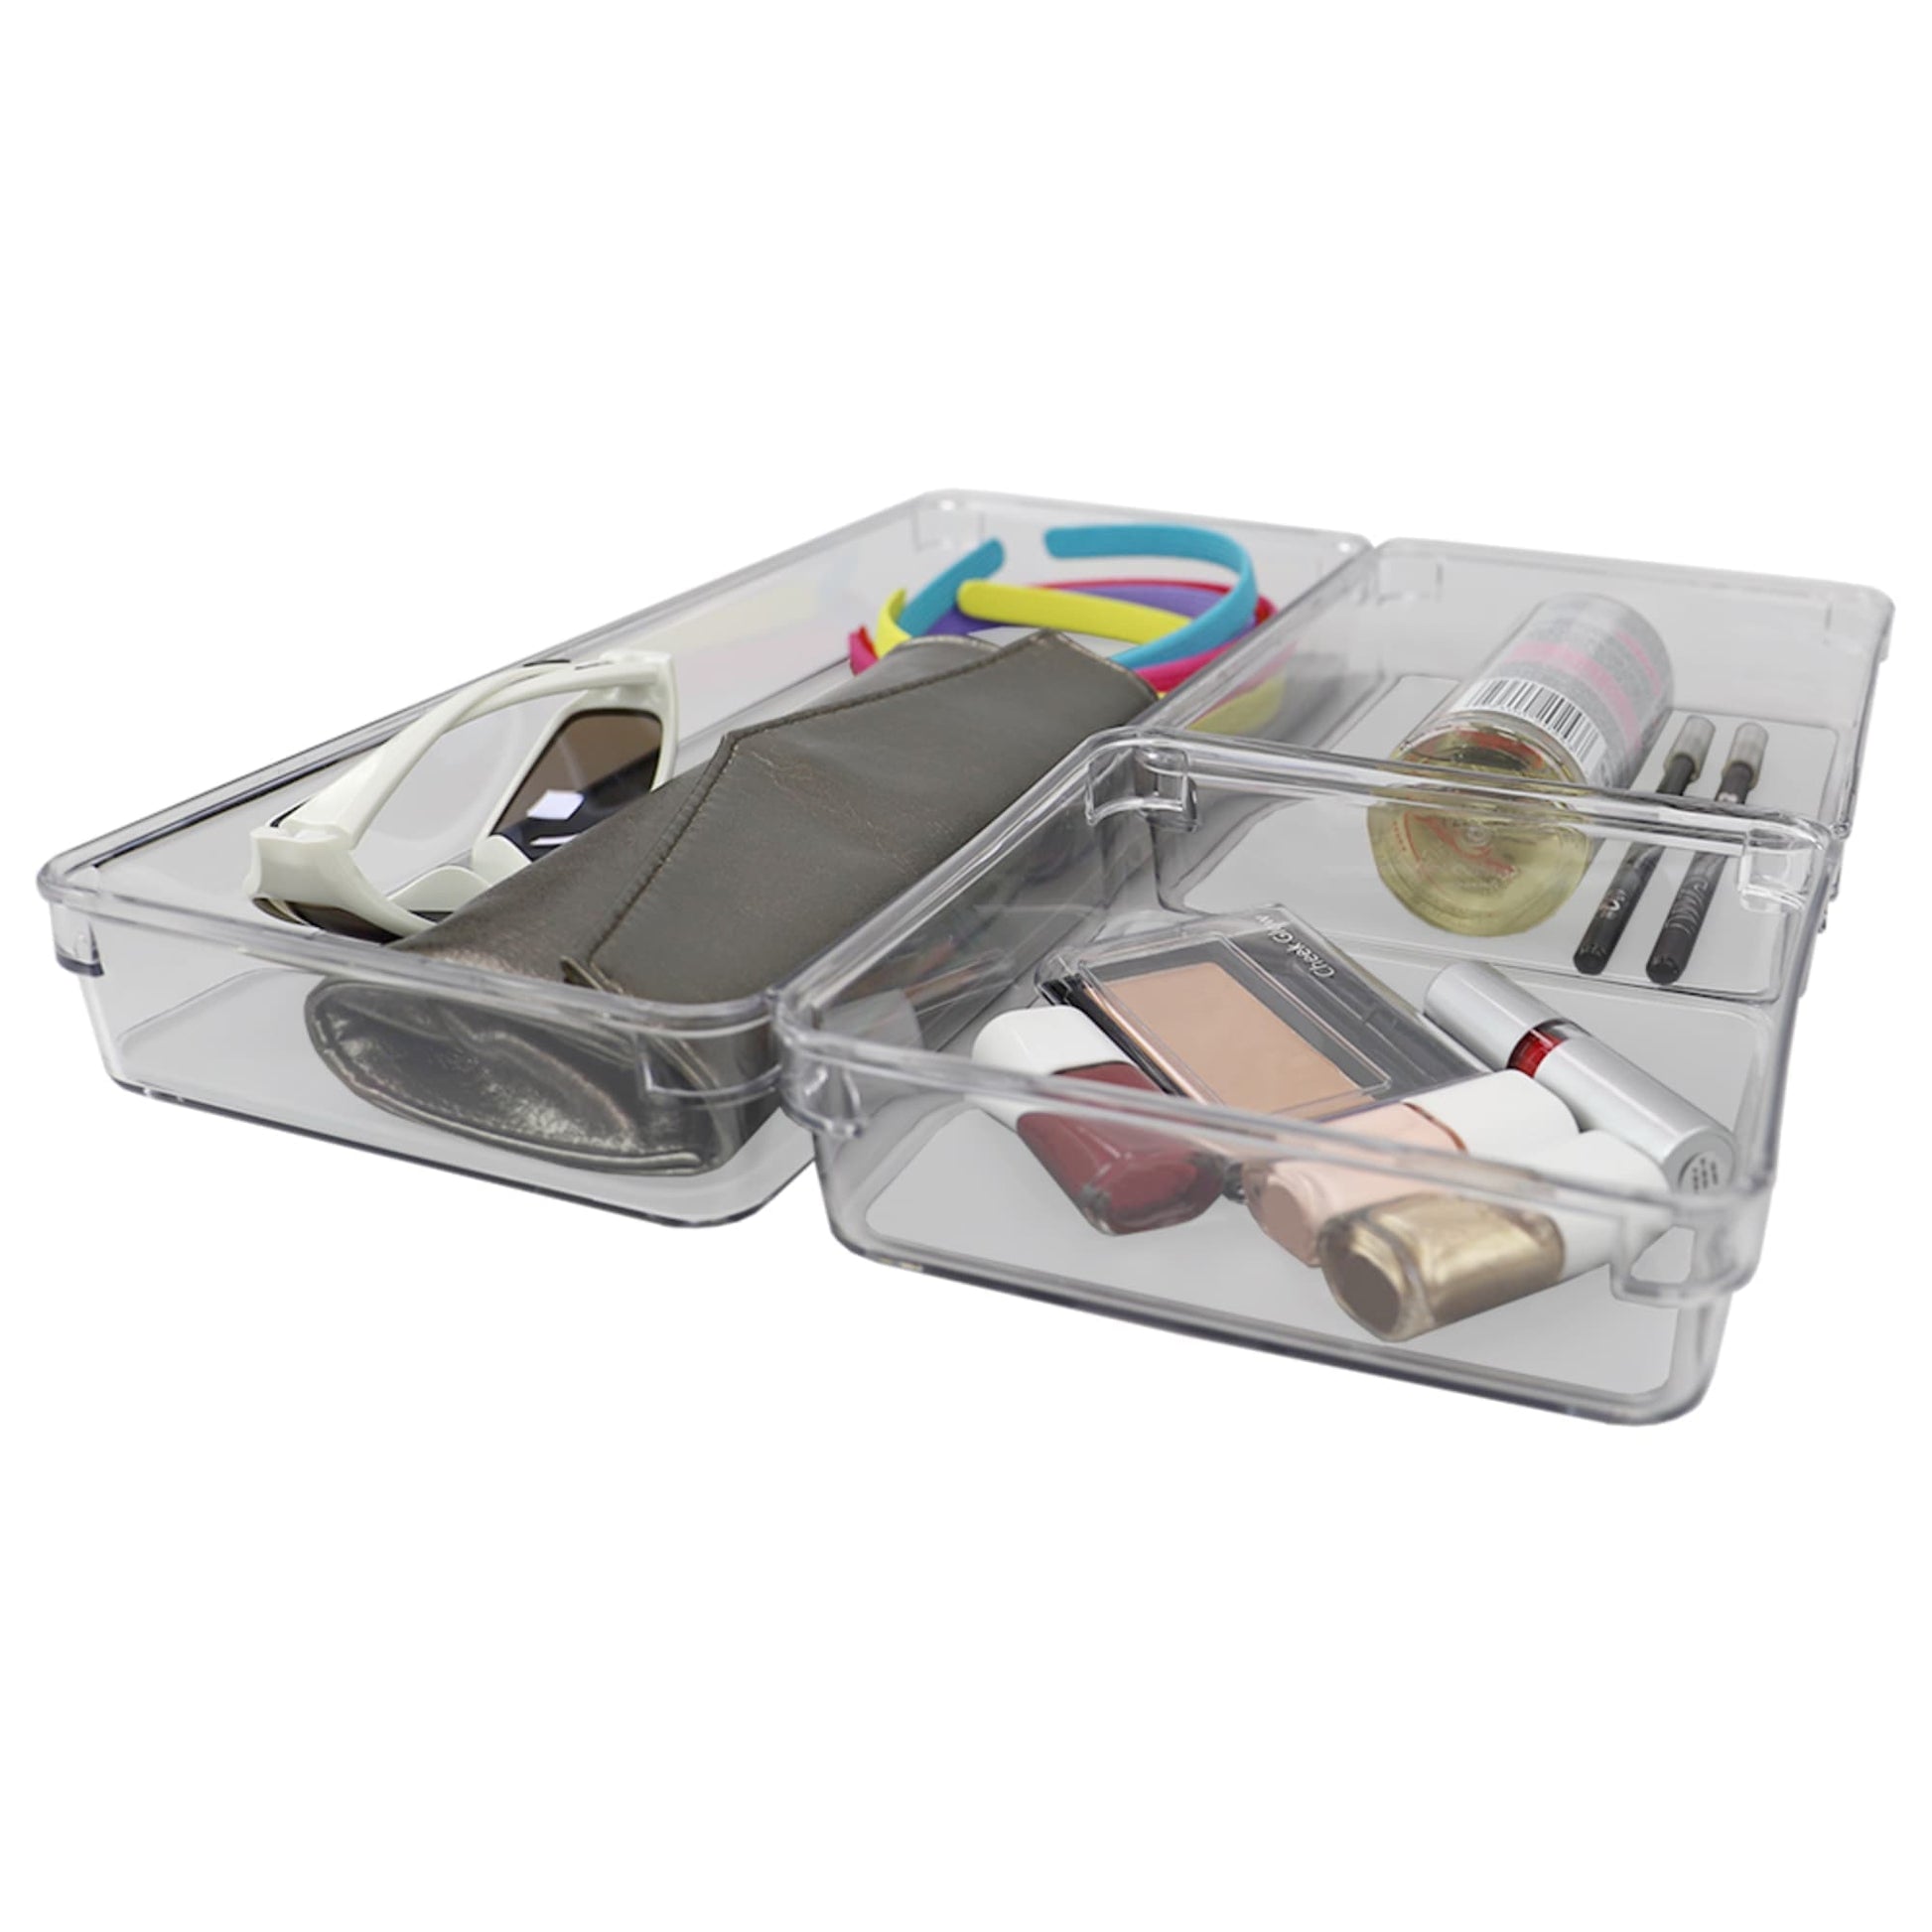 Multipurpose Organizer with Divided Slide-Out Storage Bins for